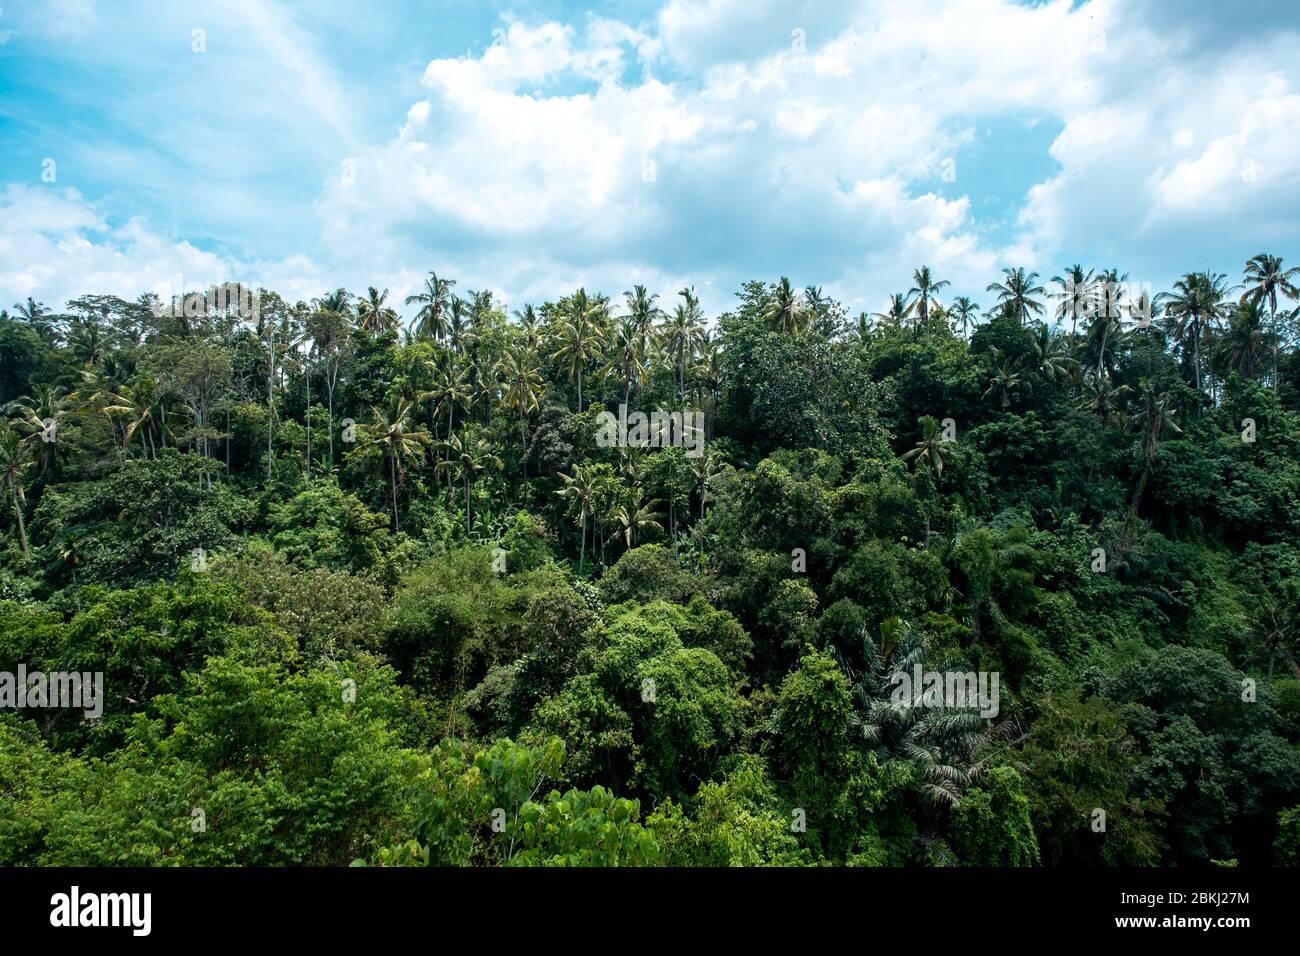 Tropical rain forest jungle with gigantic palm and banyan trees in Ubud, Bali Island. Stock Photo